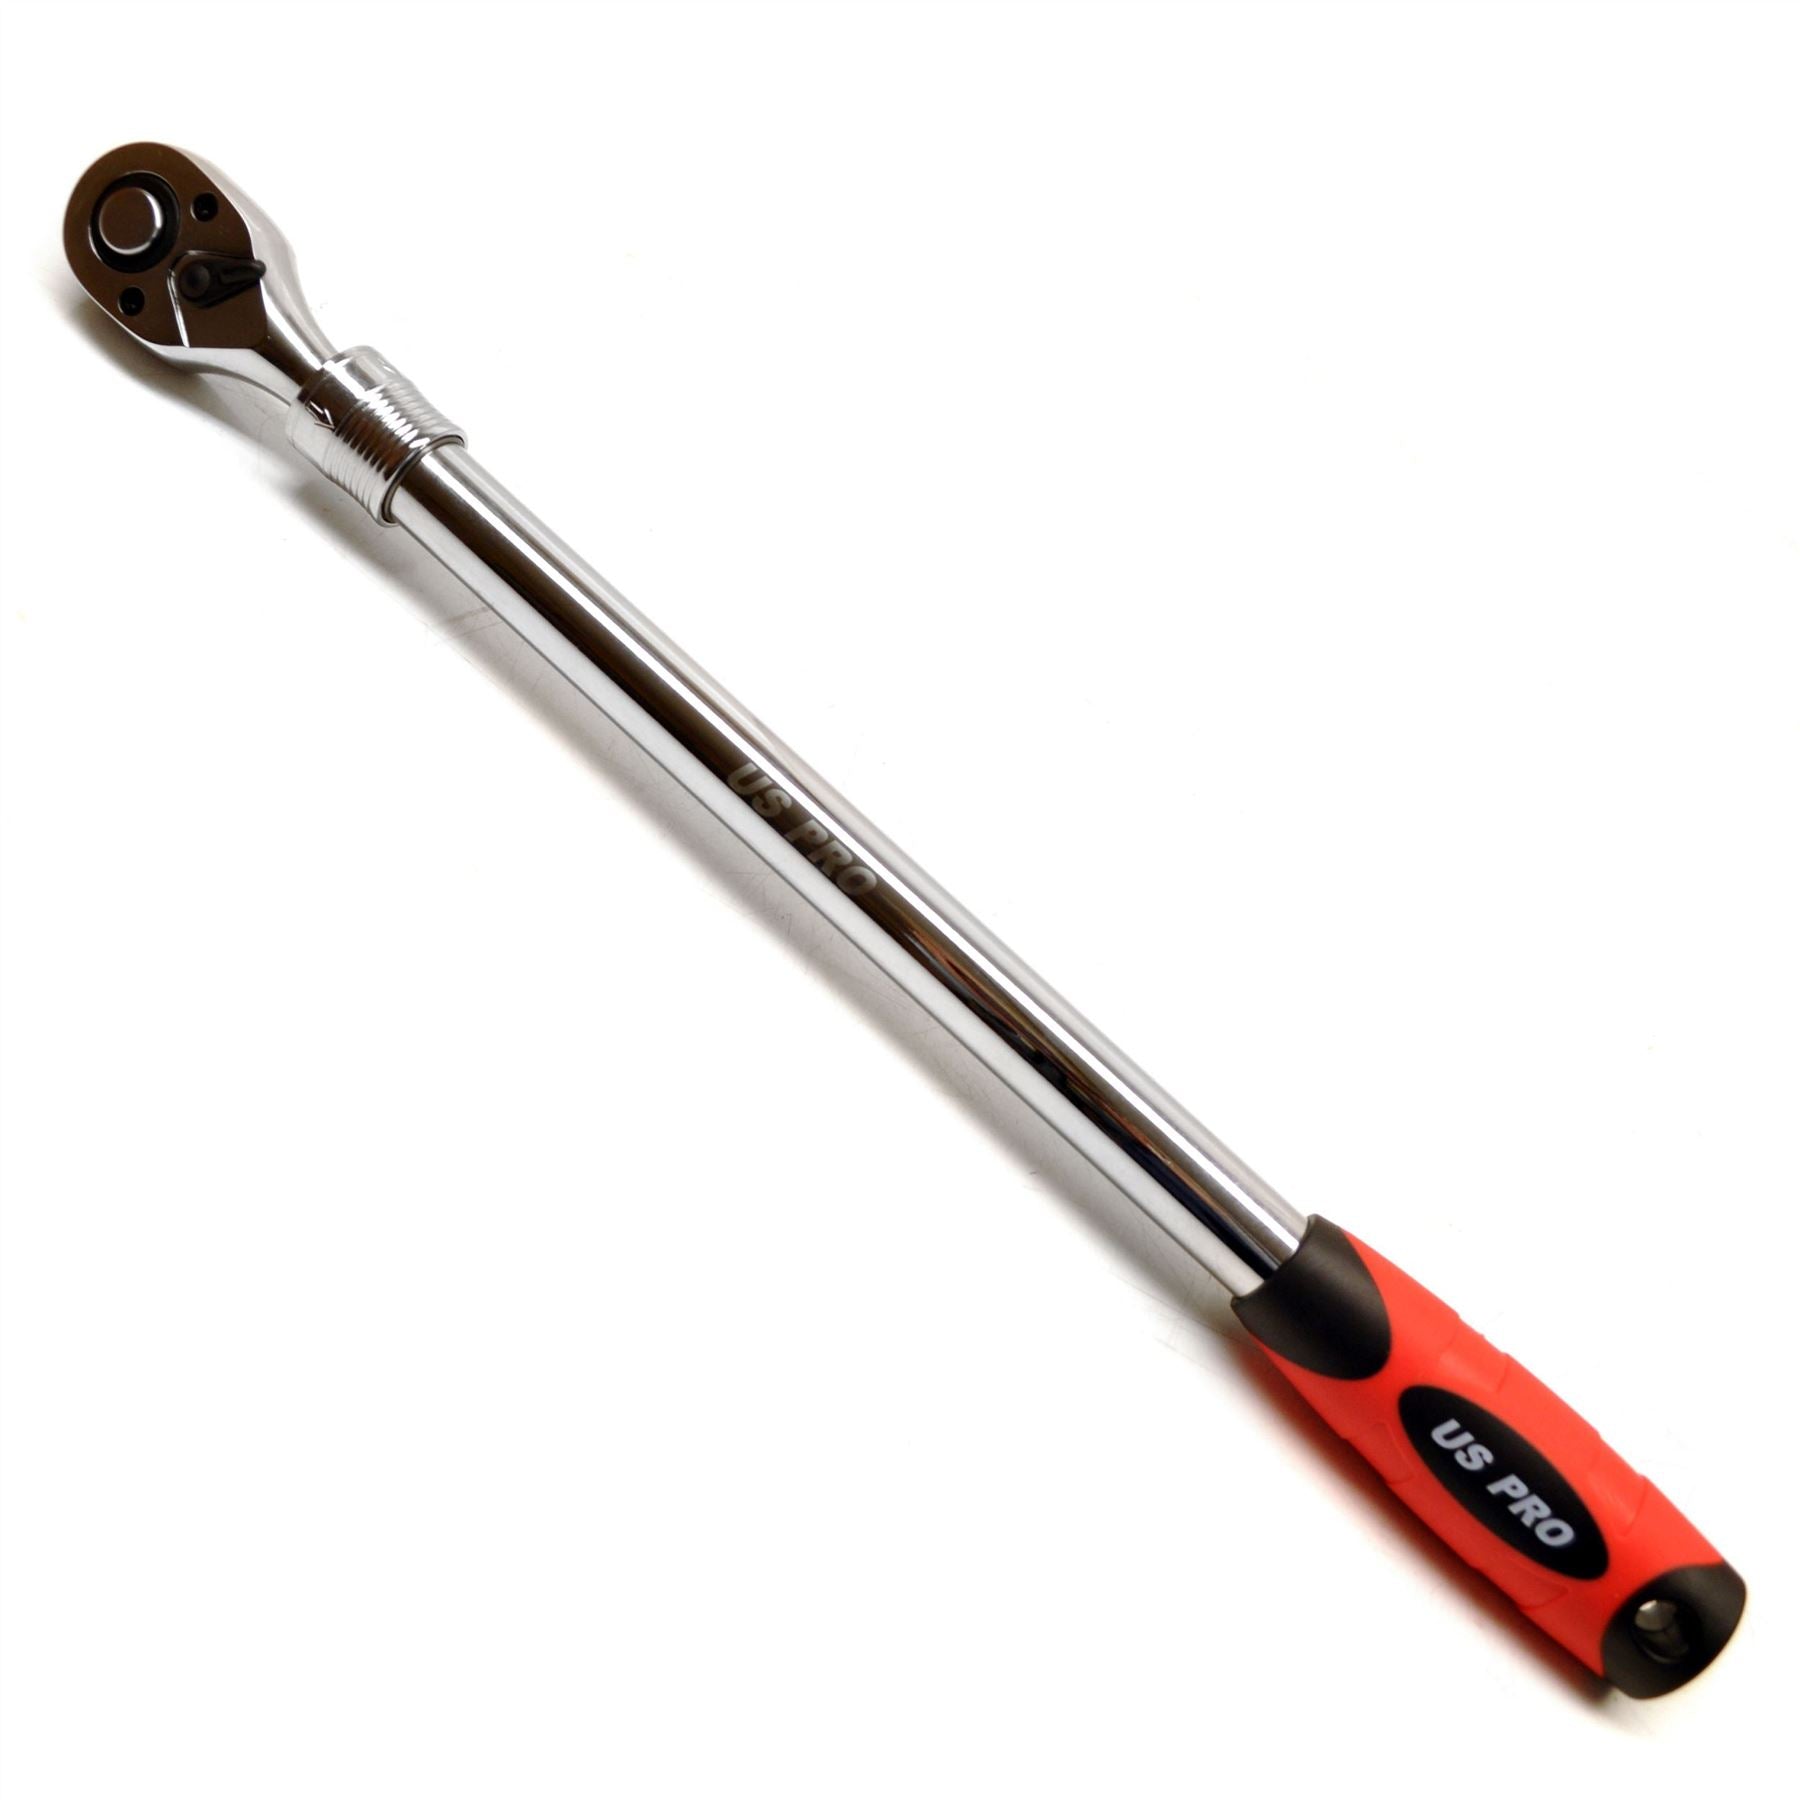 1/2" drive Extendable Ratchet 18-24" (460mm-610mm) socket driver by US-Pro AT315